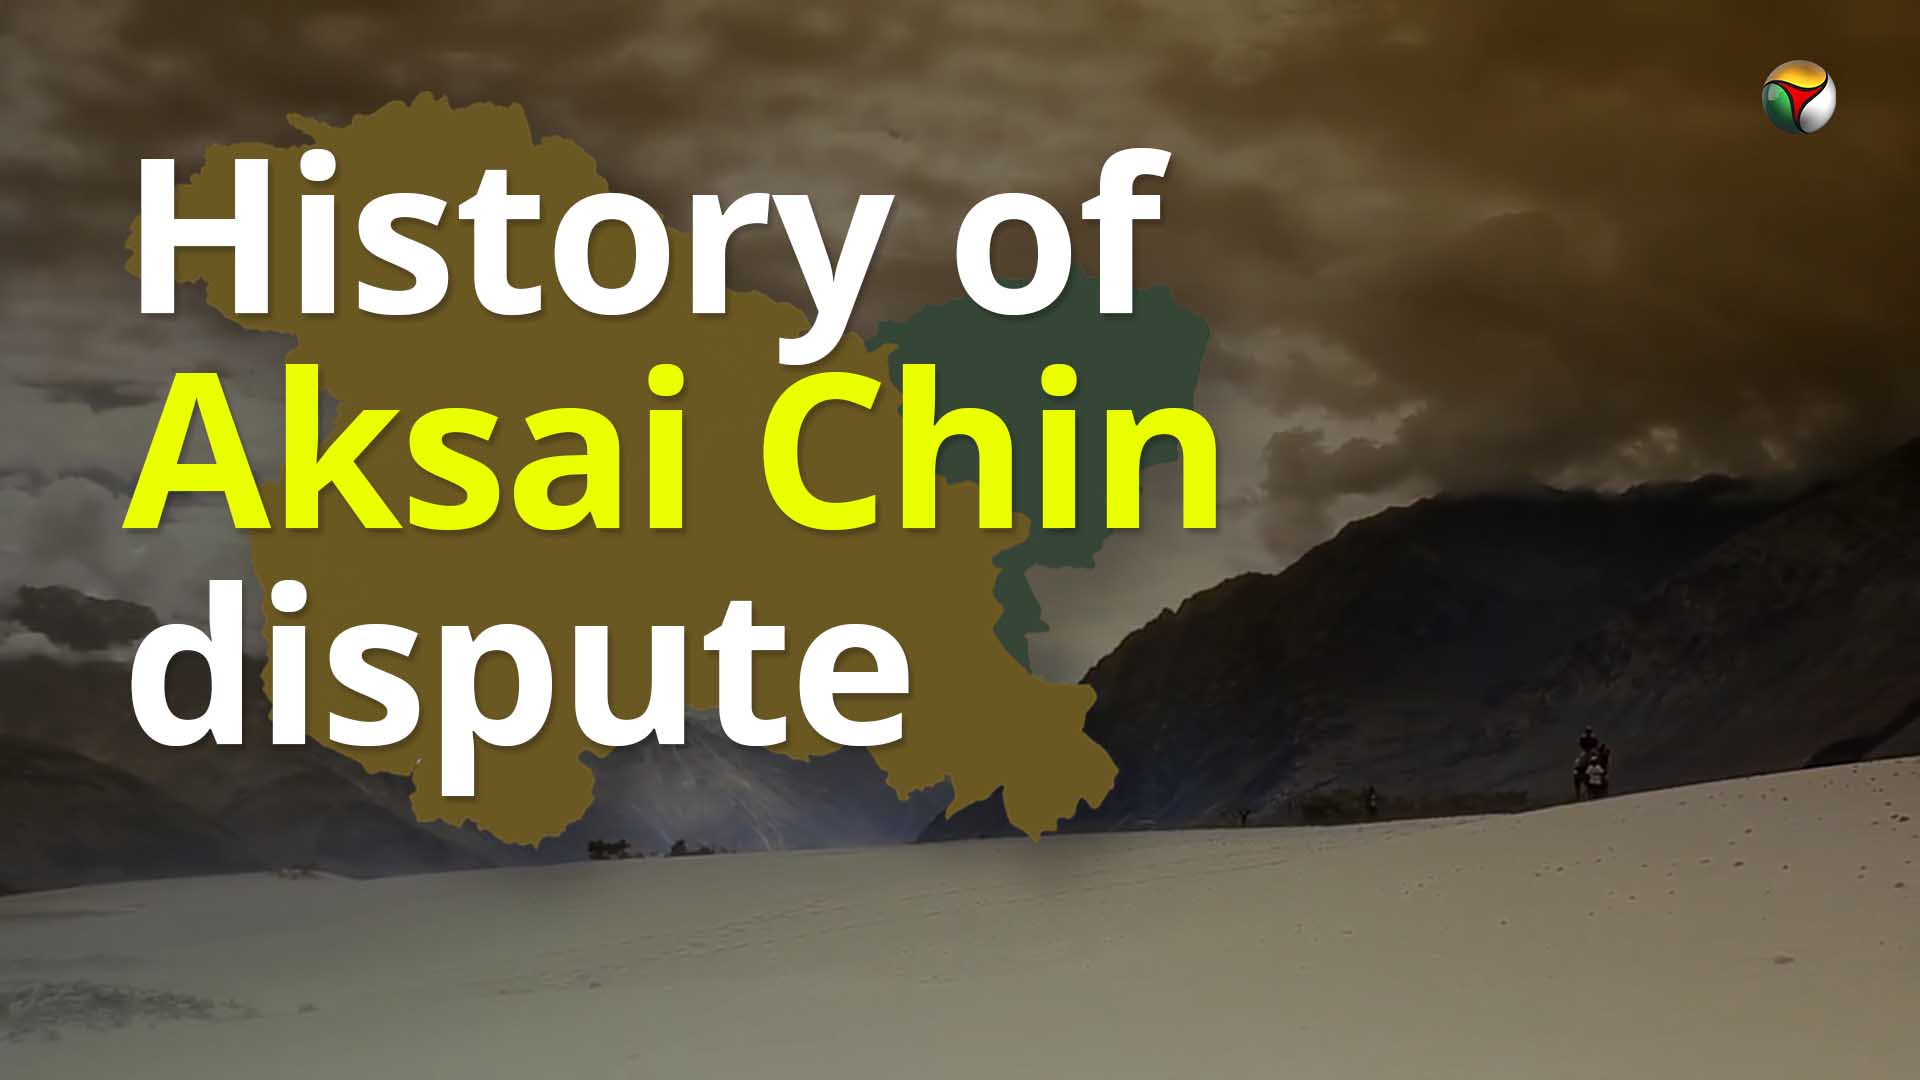 Importance of Aksai Chin for India and China